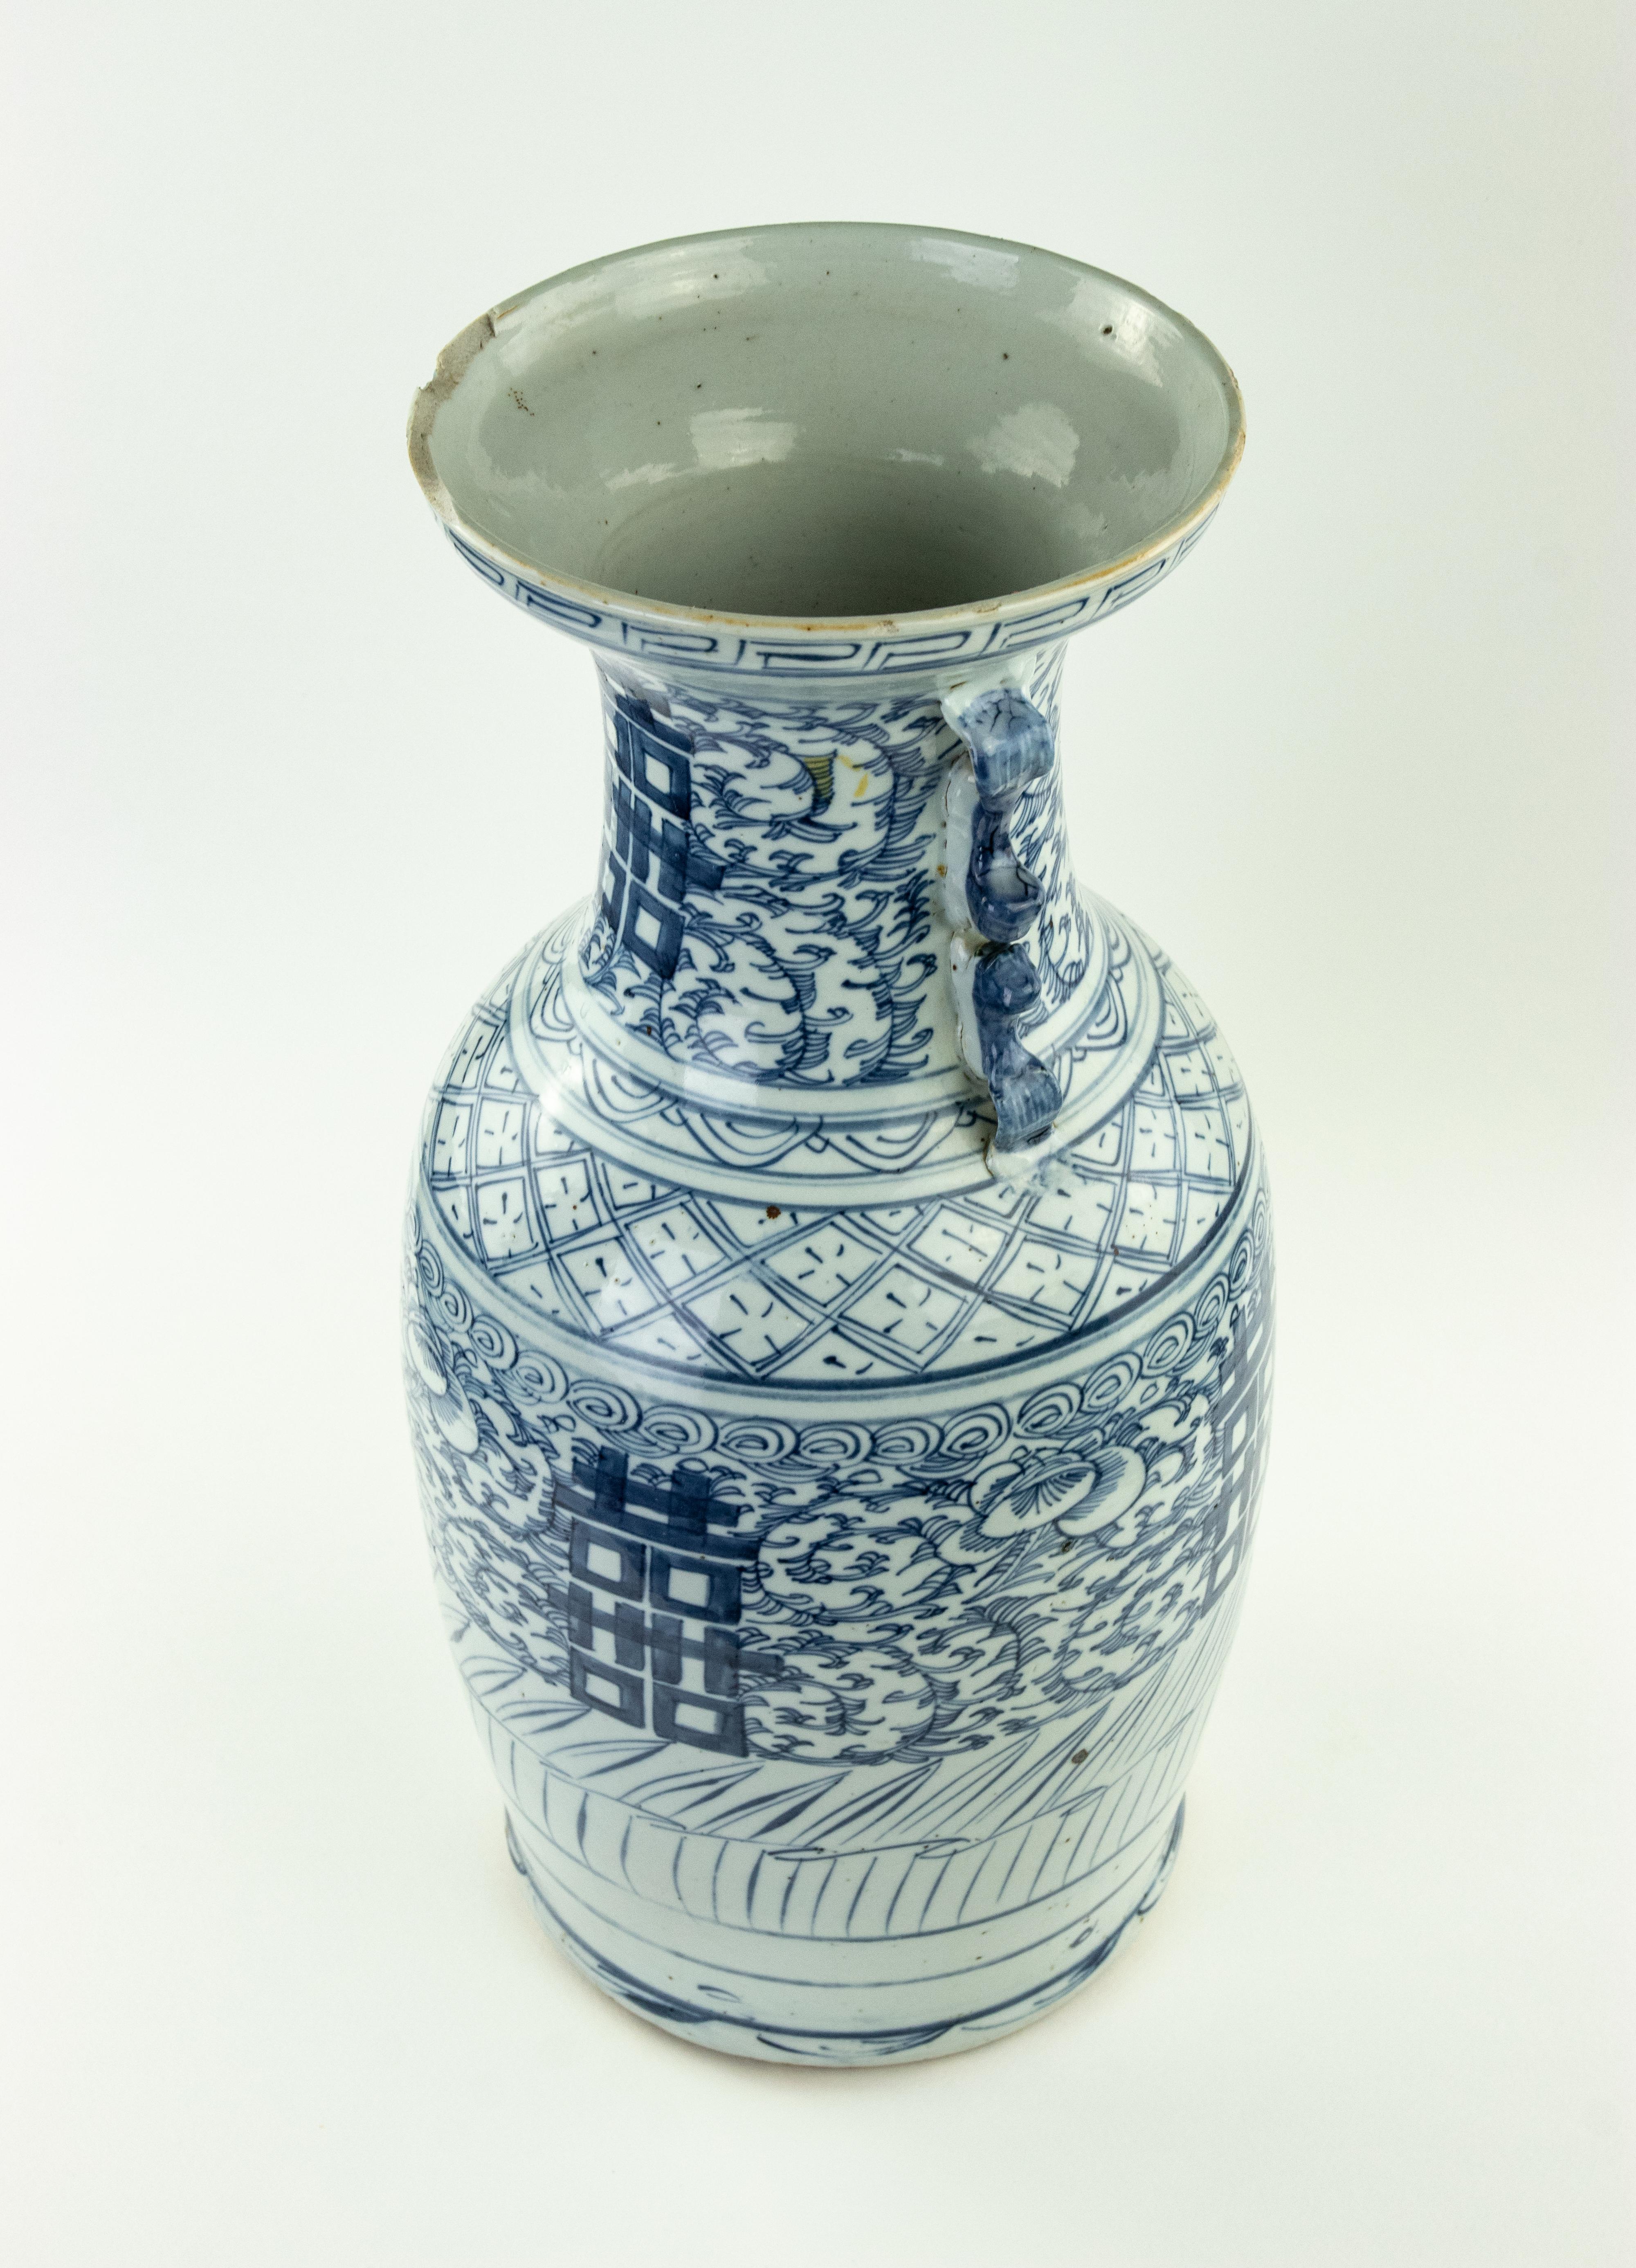 Vintage Porcelain Vase, China early 20th Century

Painted in underglaze blue with ideogram bands representing conjugal happiness on a background of stylized peonies.handles with pairs of Fo Dogs.

43,5 x 18 cm.

In good condition except for minor